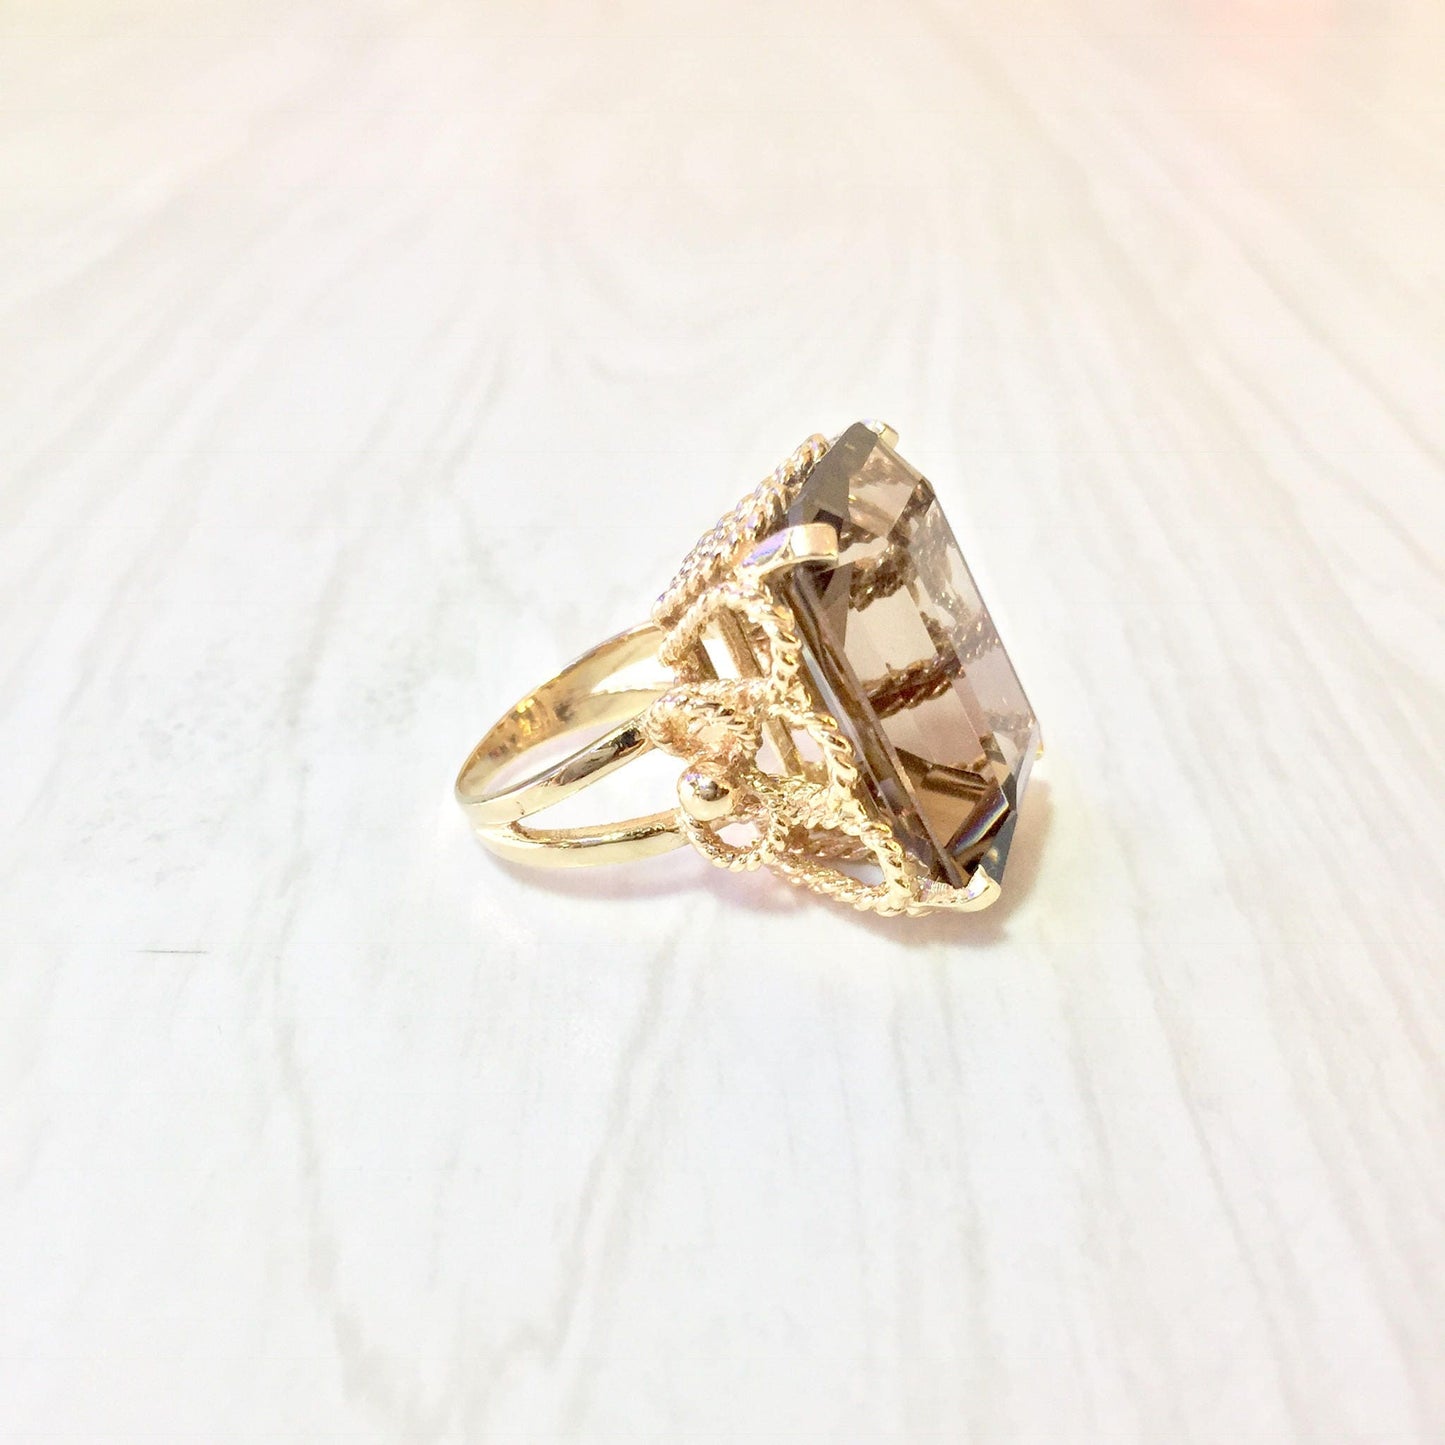 14K yellow gold ring featuring an emerald cut smoky quartz gemstone in an ornate vintage-inspired setting, perfect as a statement cocktail ring or eye-catching jewelry gift.